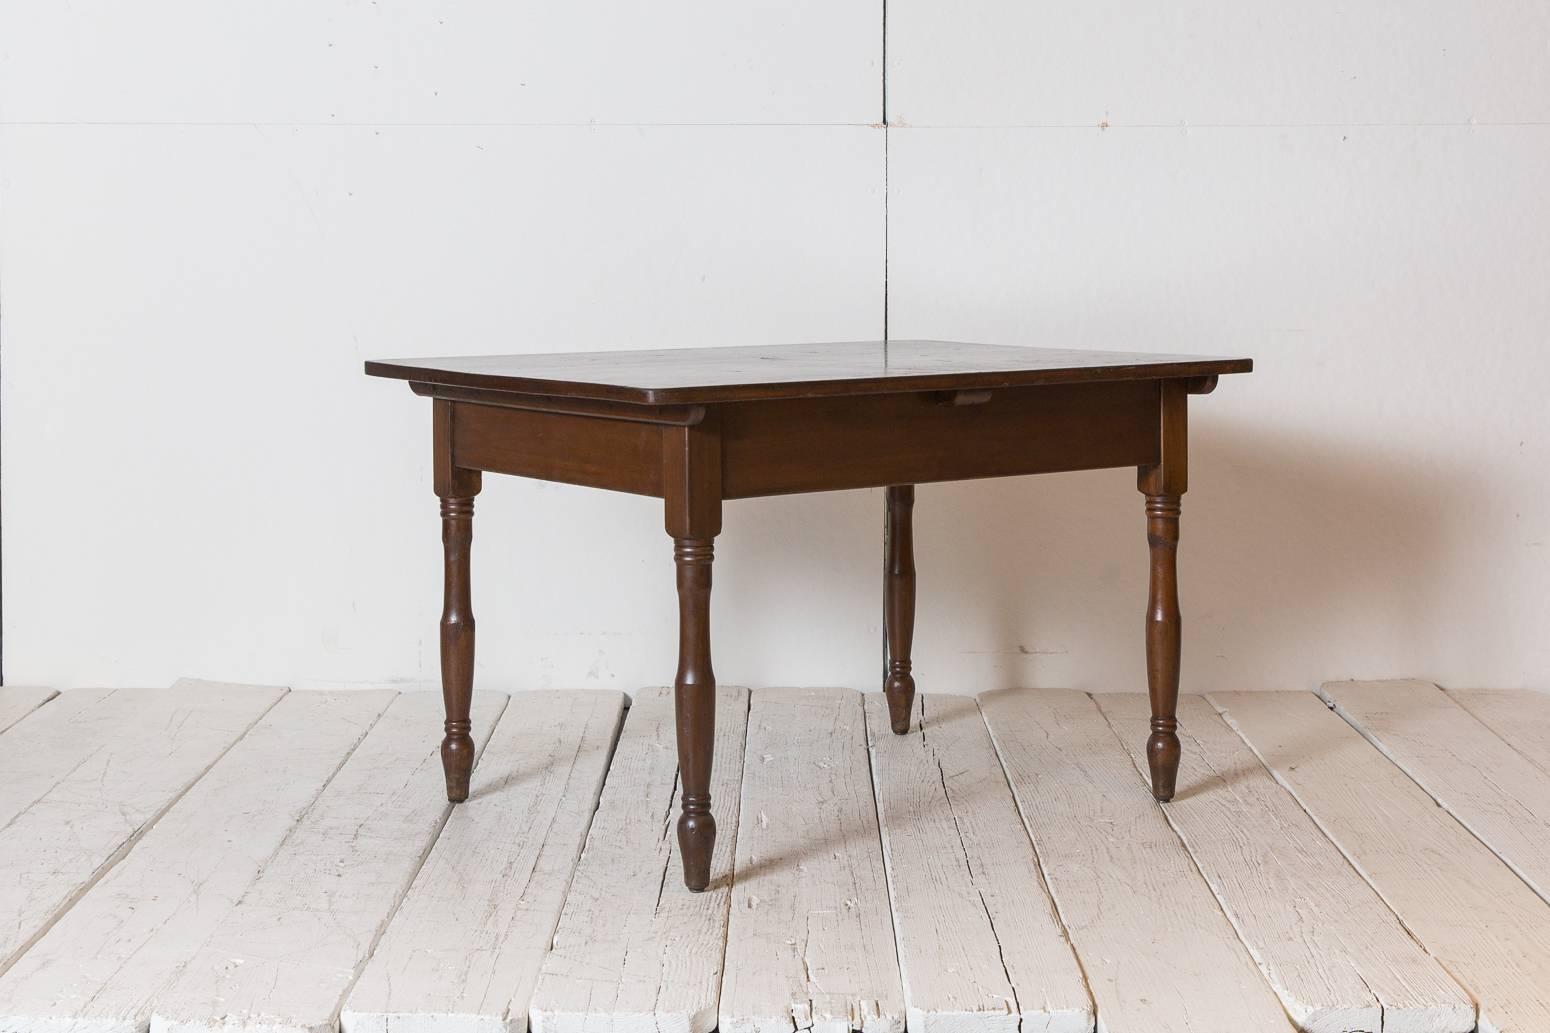 Mid-20th Century Dark Oak Stained Farm Table with Turned Legs